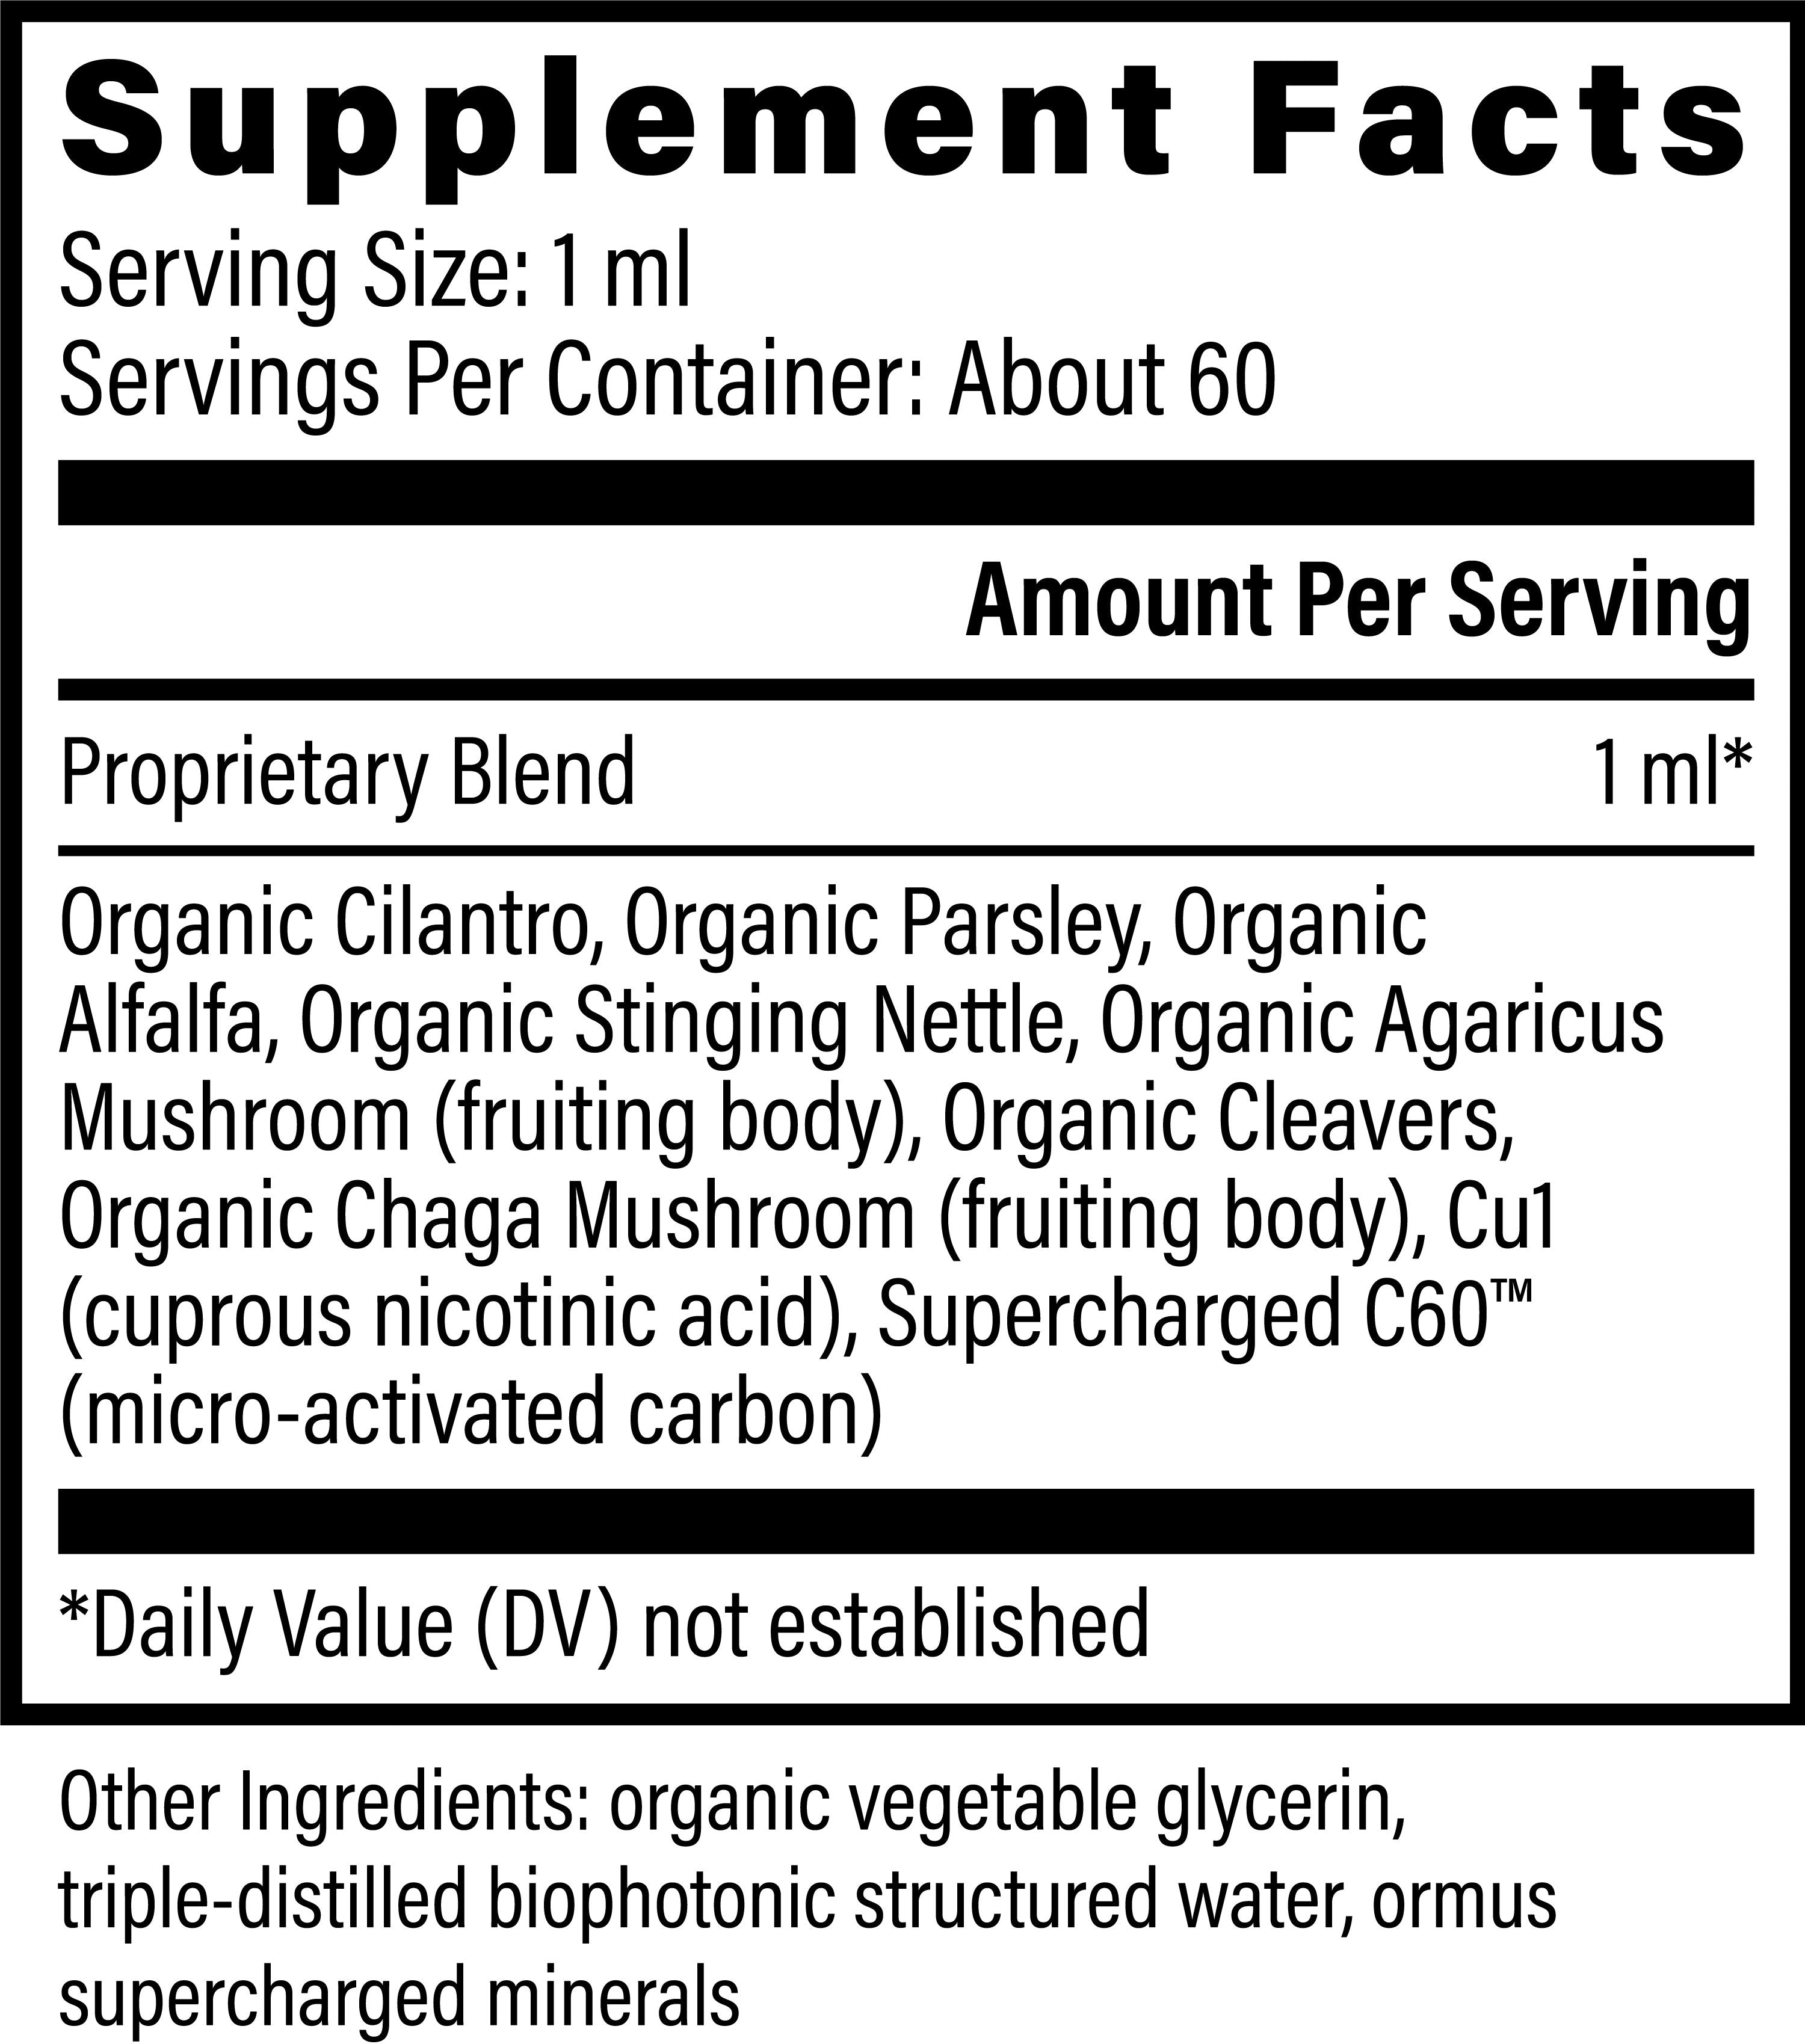 A label for the Global Healing Heavy Metal and Chemical Cleanse Binder Supplement Facts